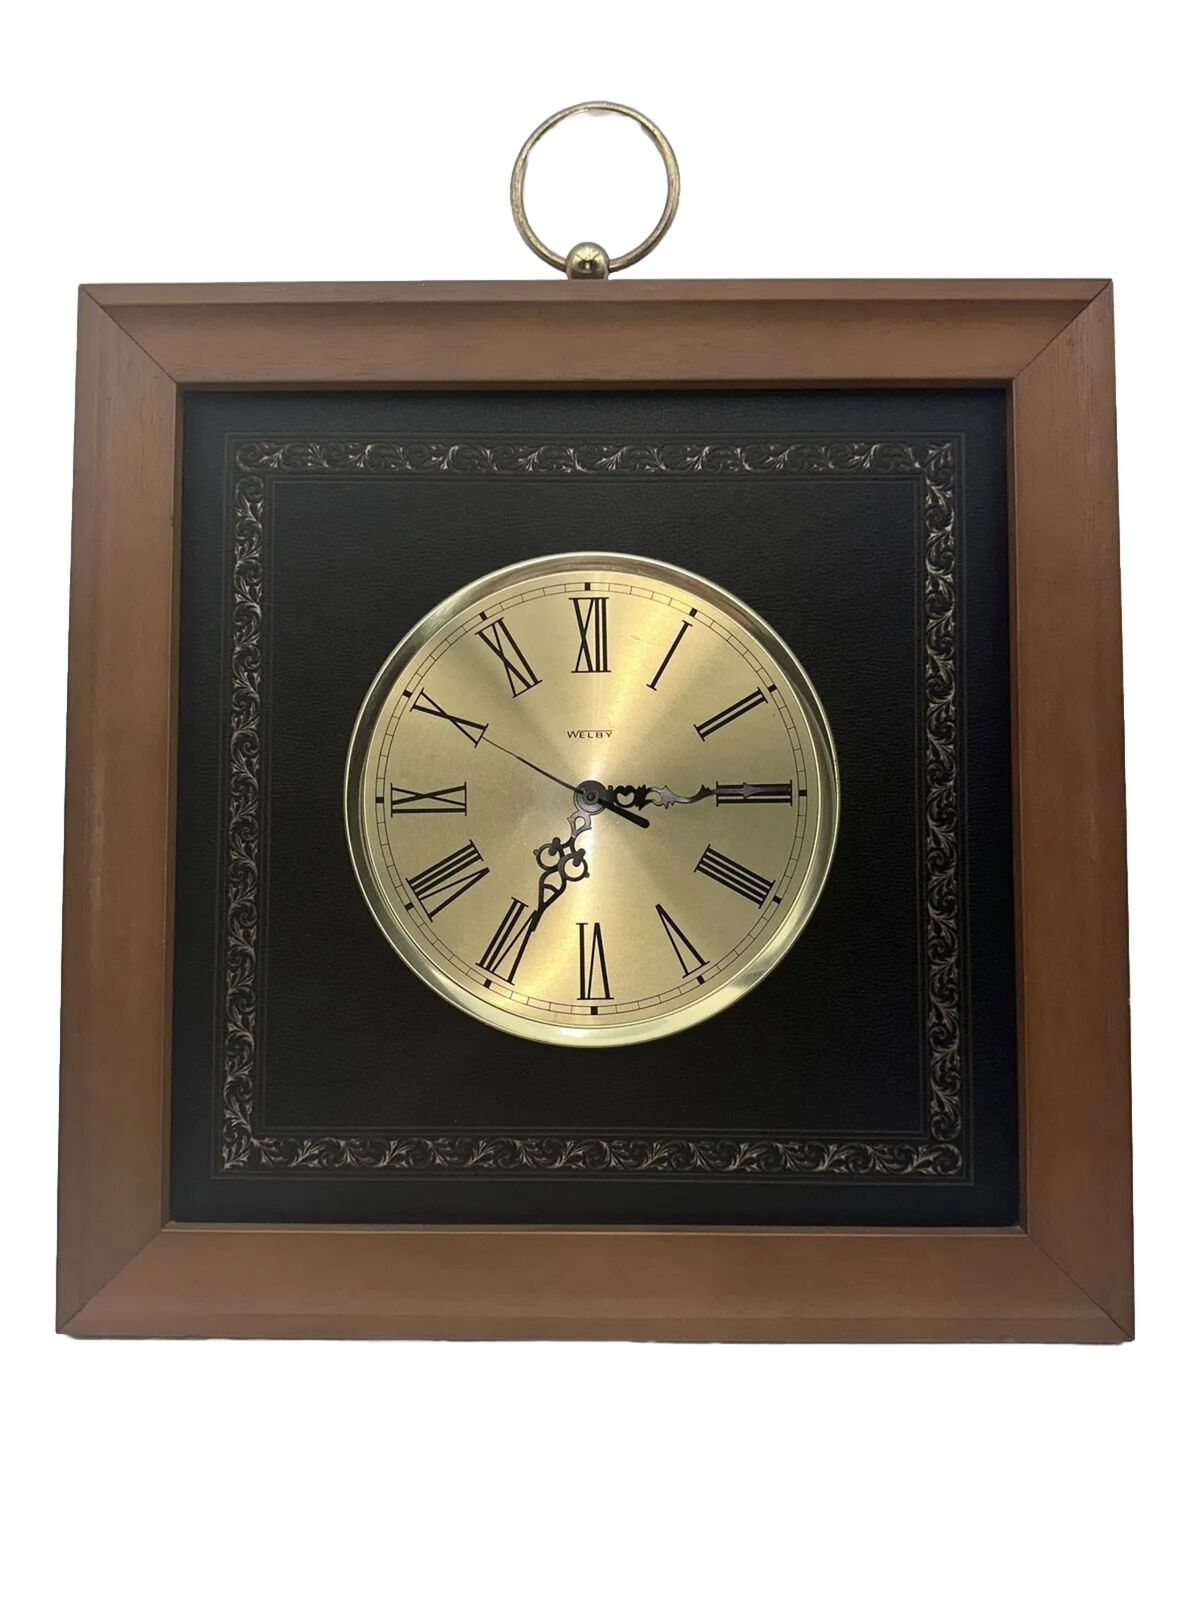 Vintage Welby Wall Clock Gold/Black Square Wood Frame, Tested, Please READ